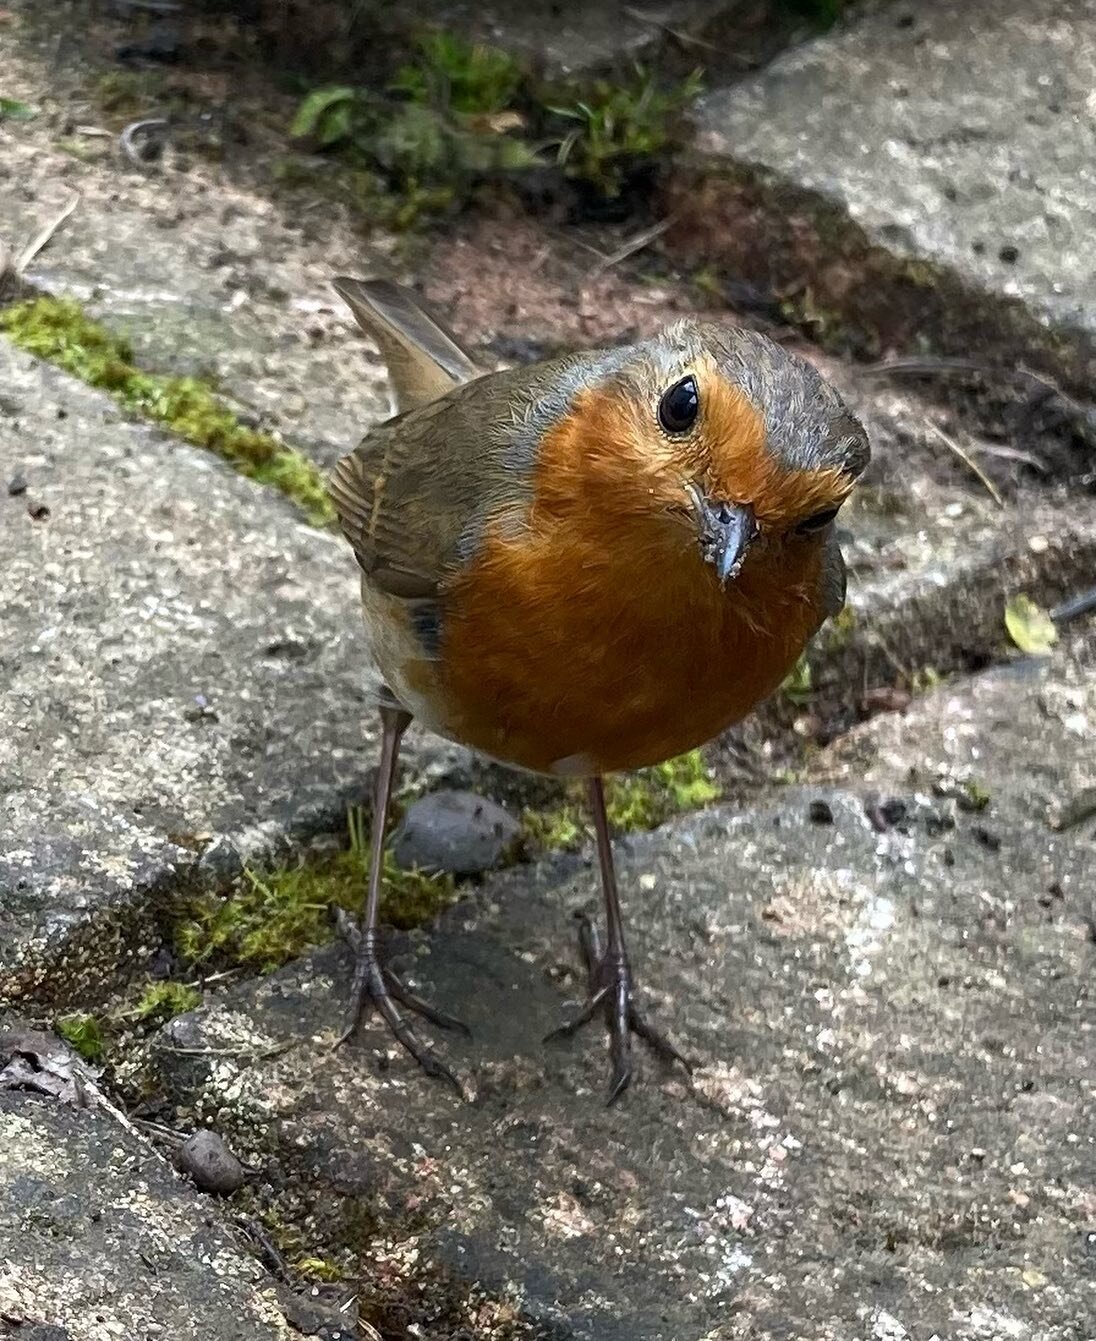 What an curious little friend I had with me today! Two #robin seemed to be tag teaming food collection. They lucked out with me today getting weeds out of the patio and revealing lots of tasty morsels. They returned to their nests with laden beaks ! 